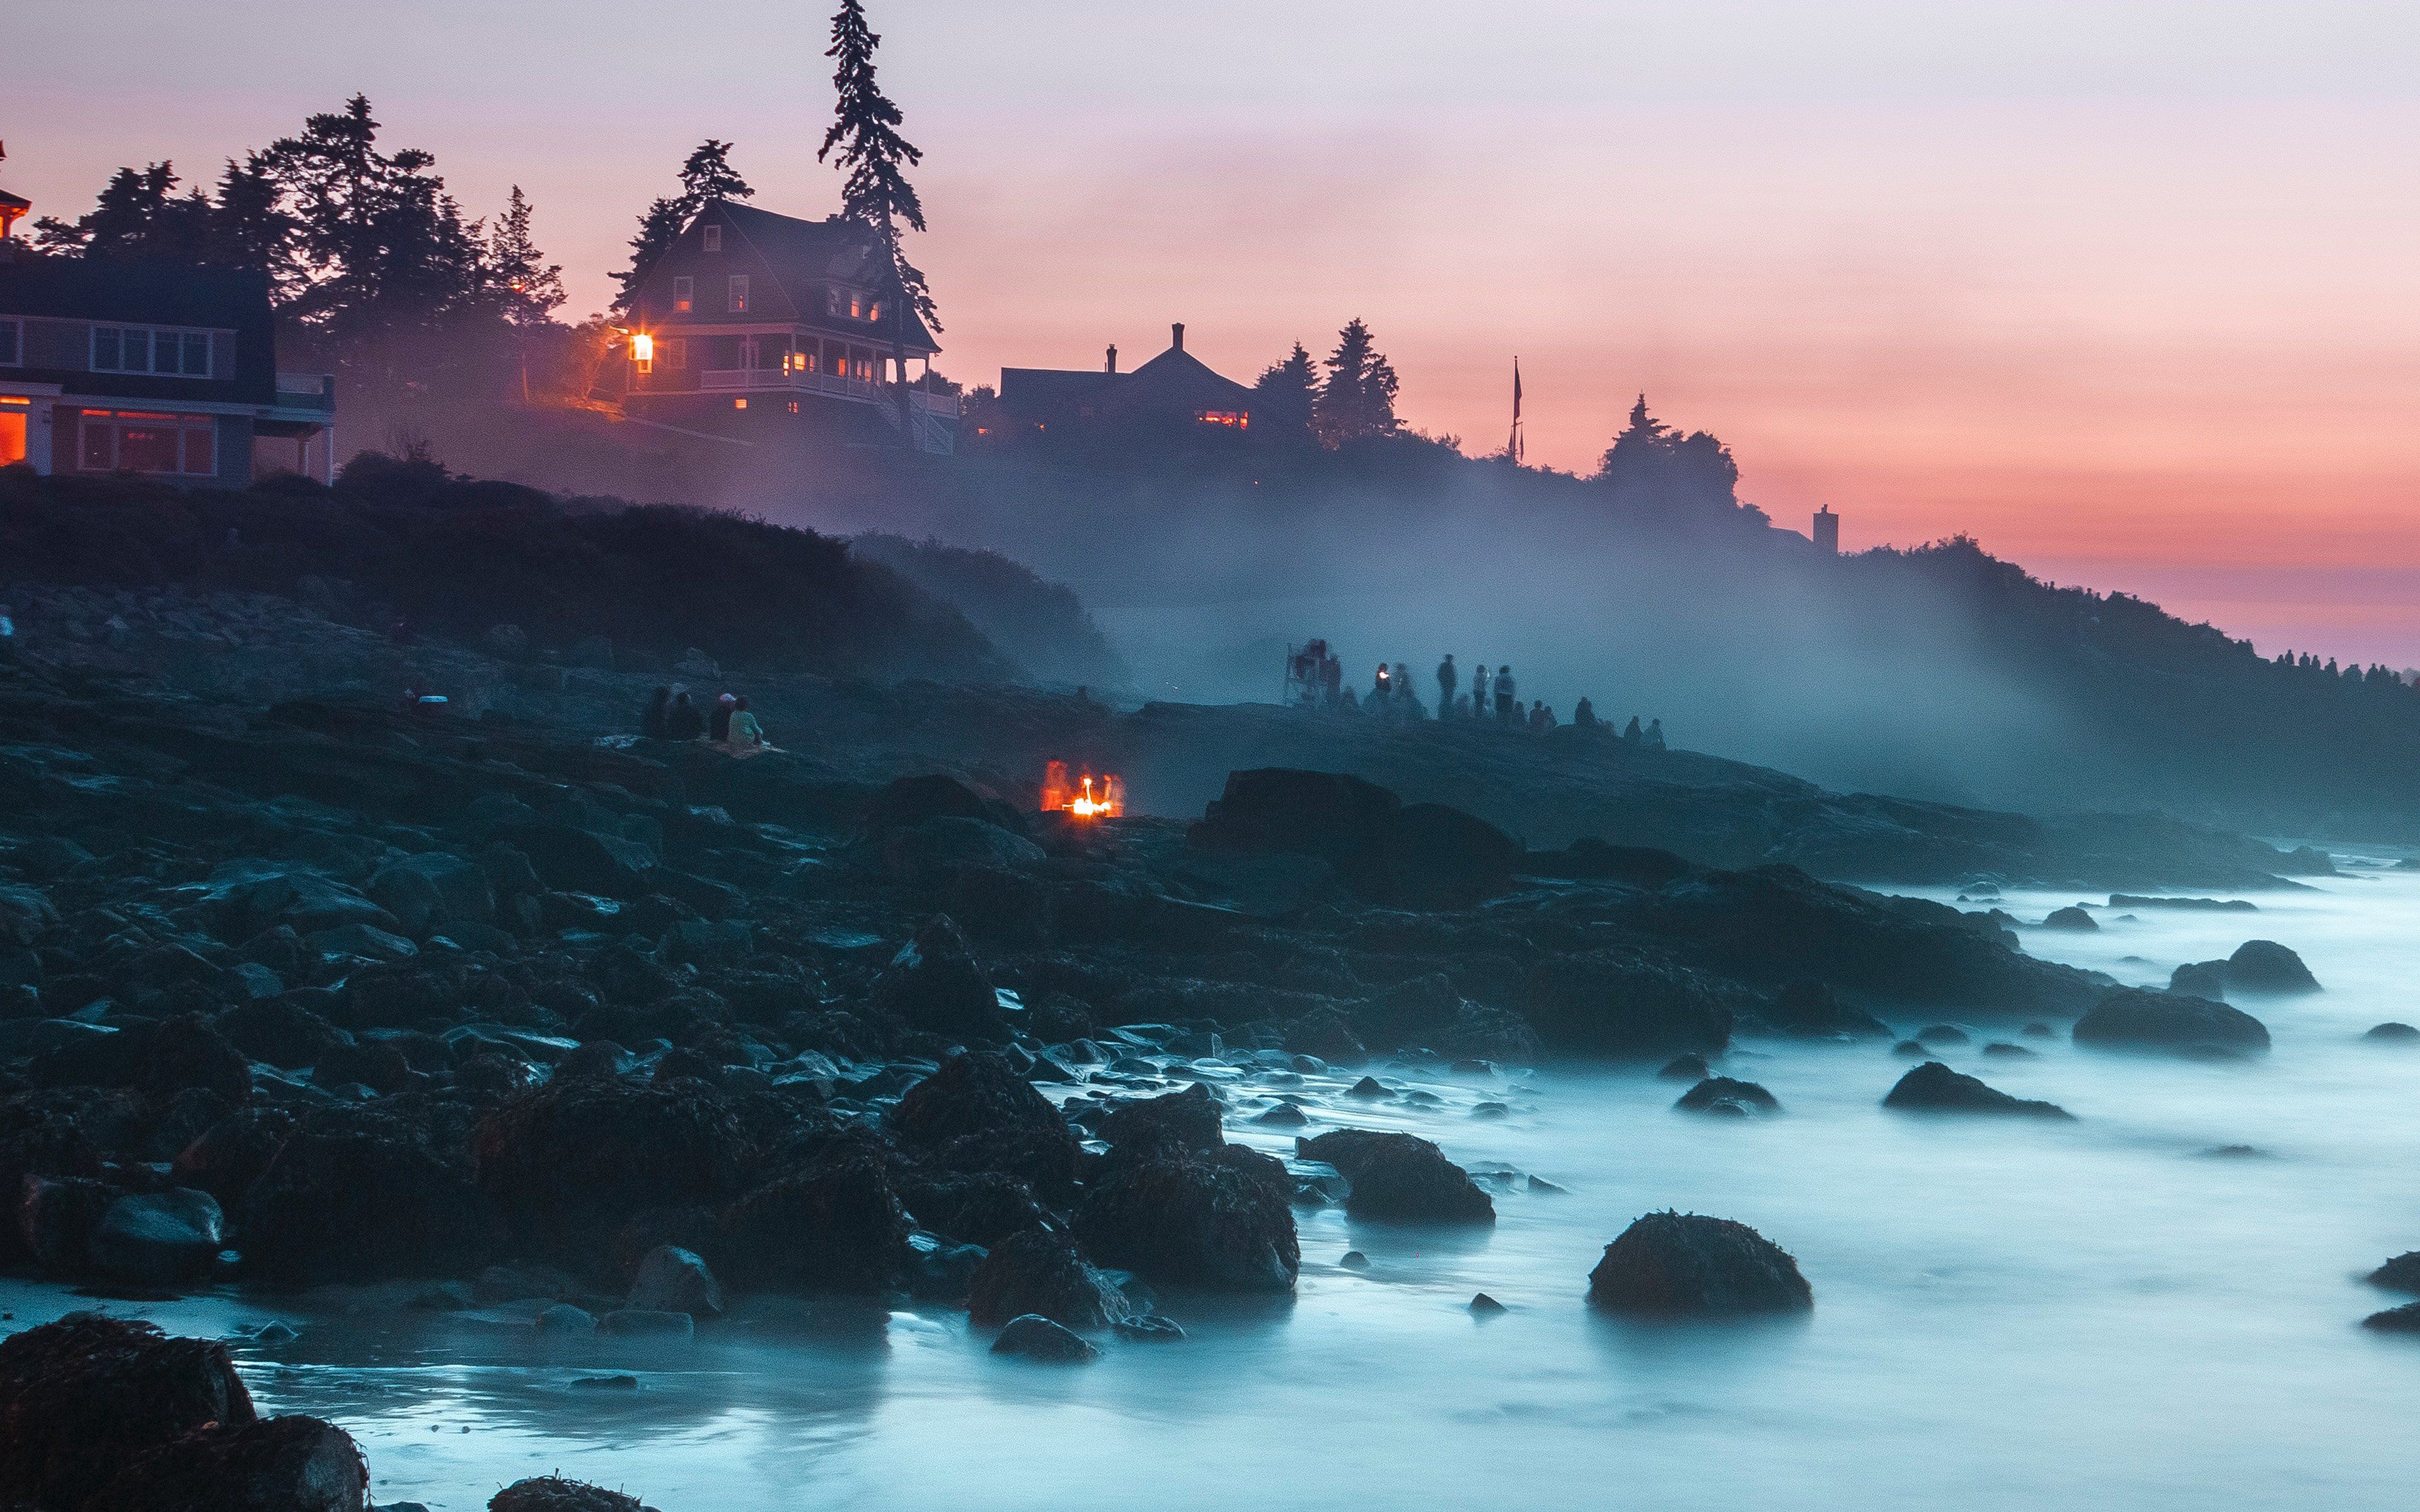 A group of people stand on a rocky beach at dusk, surrounded by mist. - MacBook